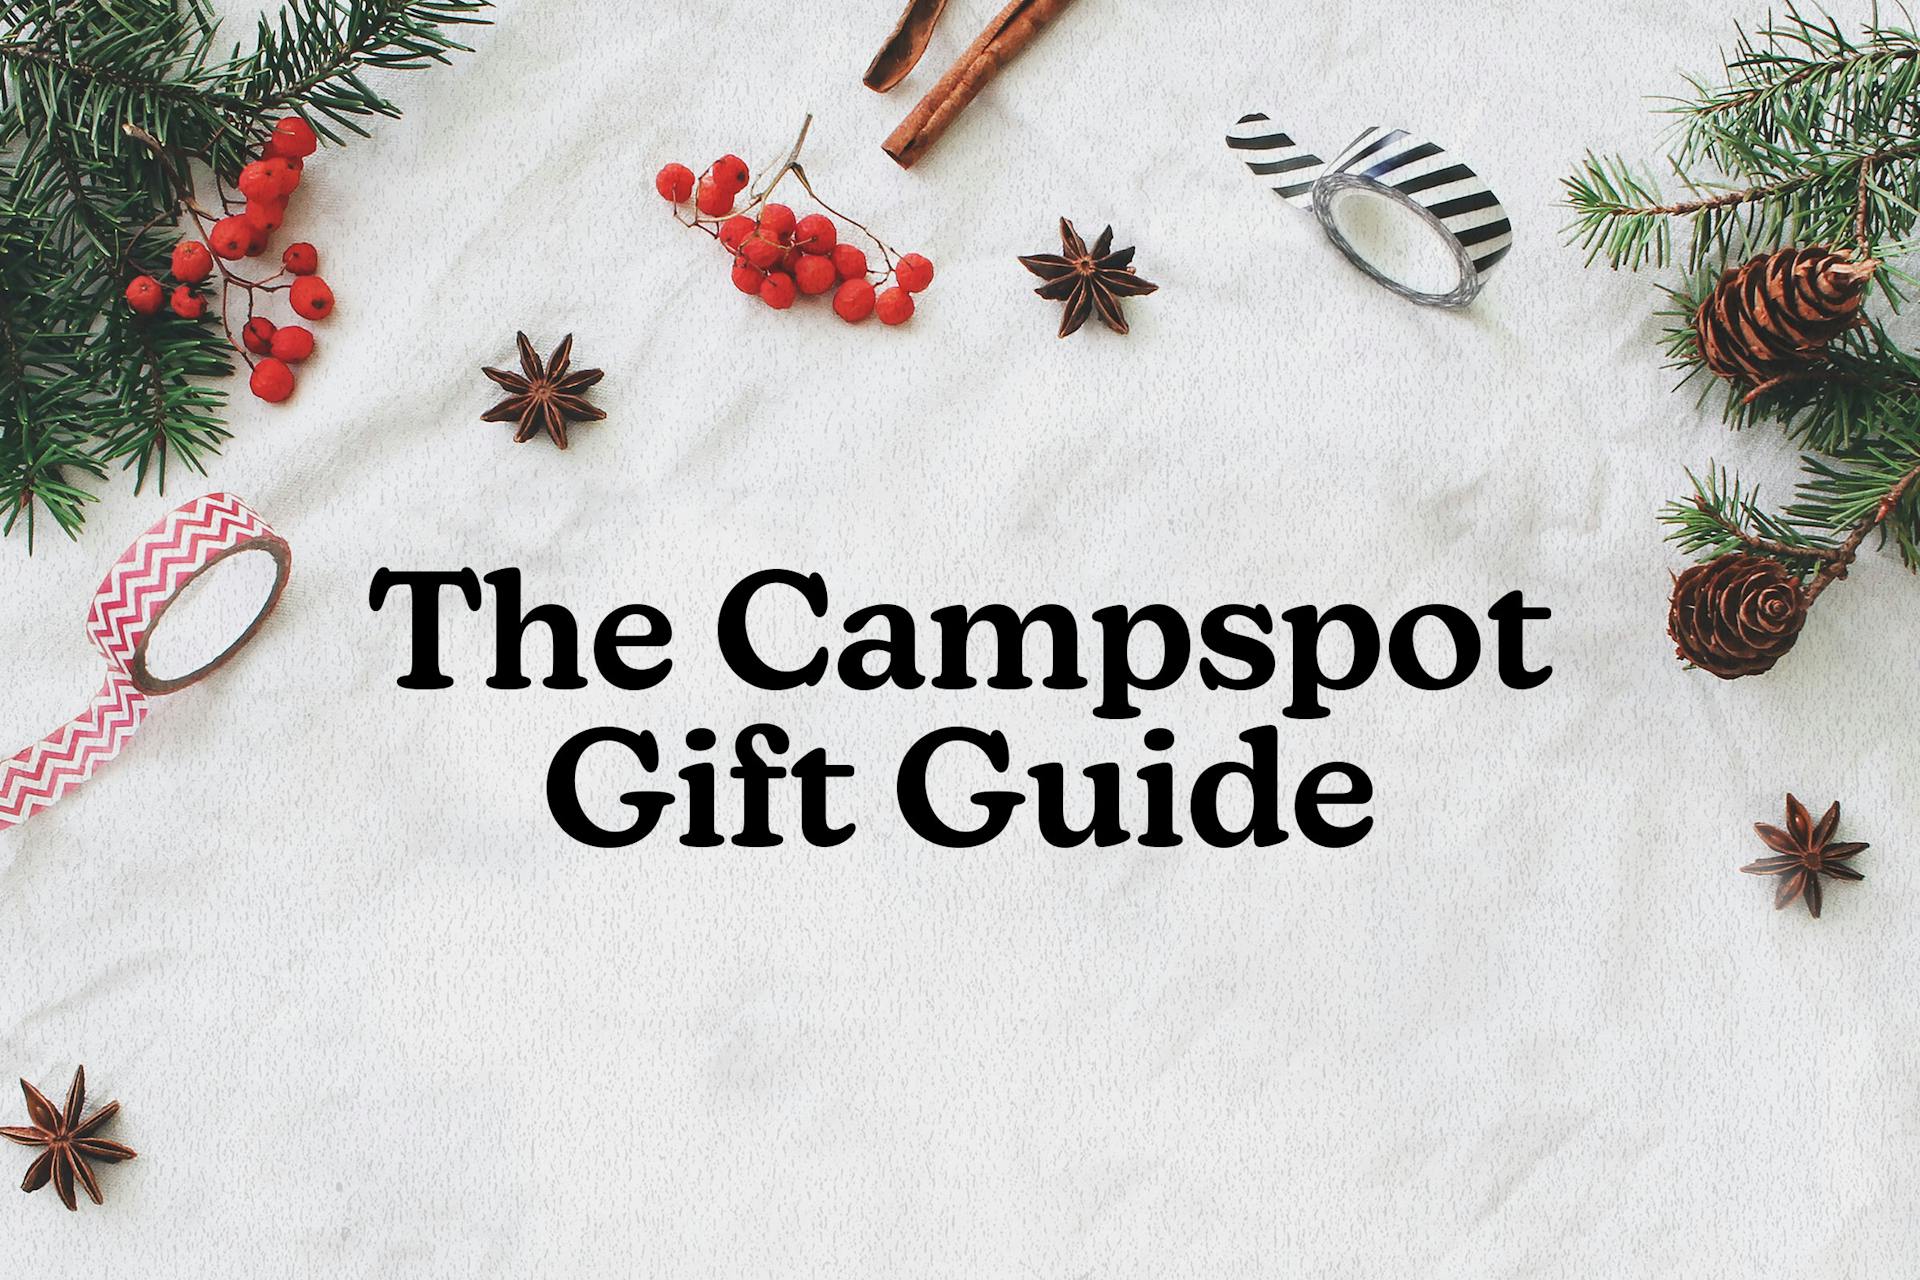 30 Camping Gift Ideas for the Holidays